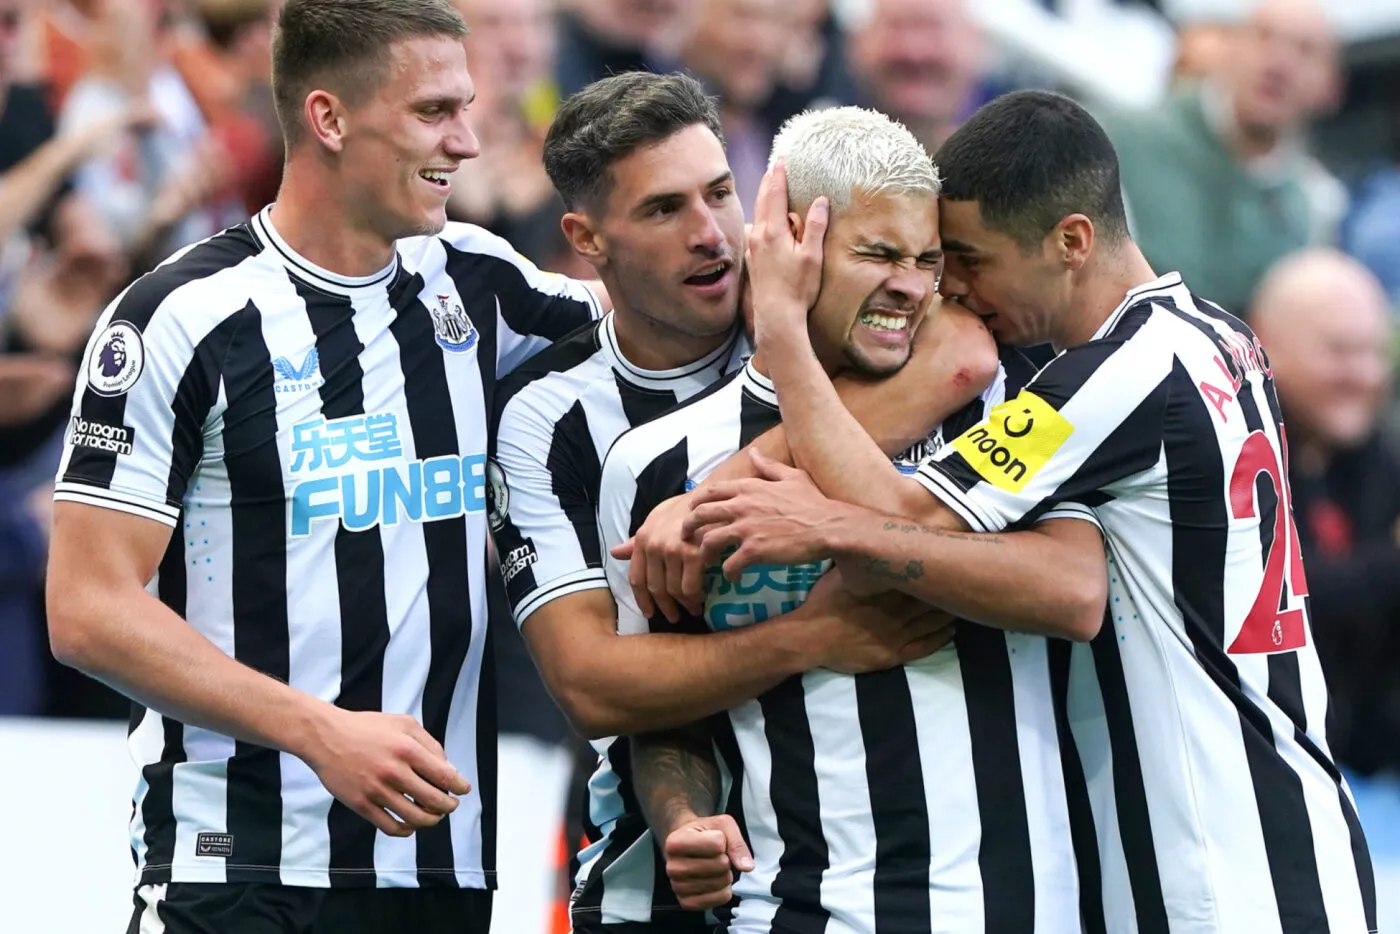 Newcastle United's Bruno Guimaraes (second right) celebrates scoring their side's third goal of the game with team-mates during the Premier League match at St James' Park, Newcastle upon Tyne. Picture date: Saturday October 8, 2022. - Photo by Icon sport